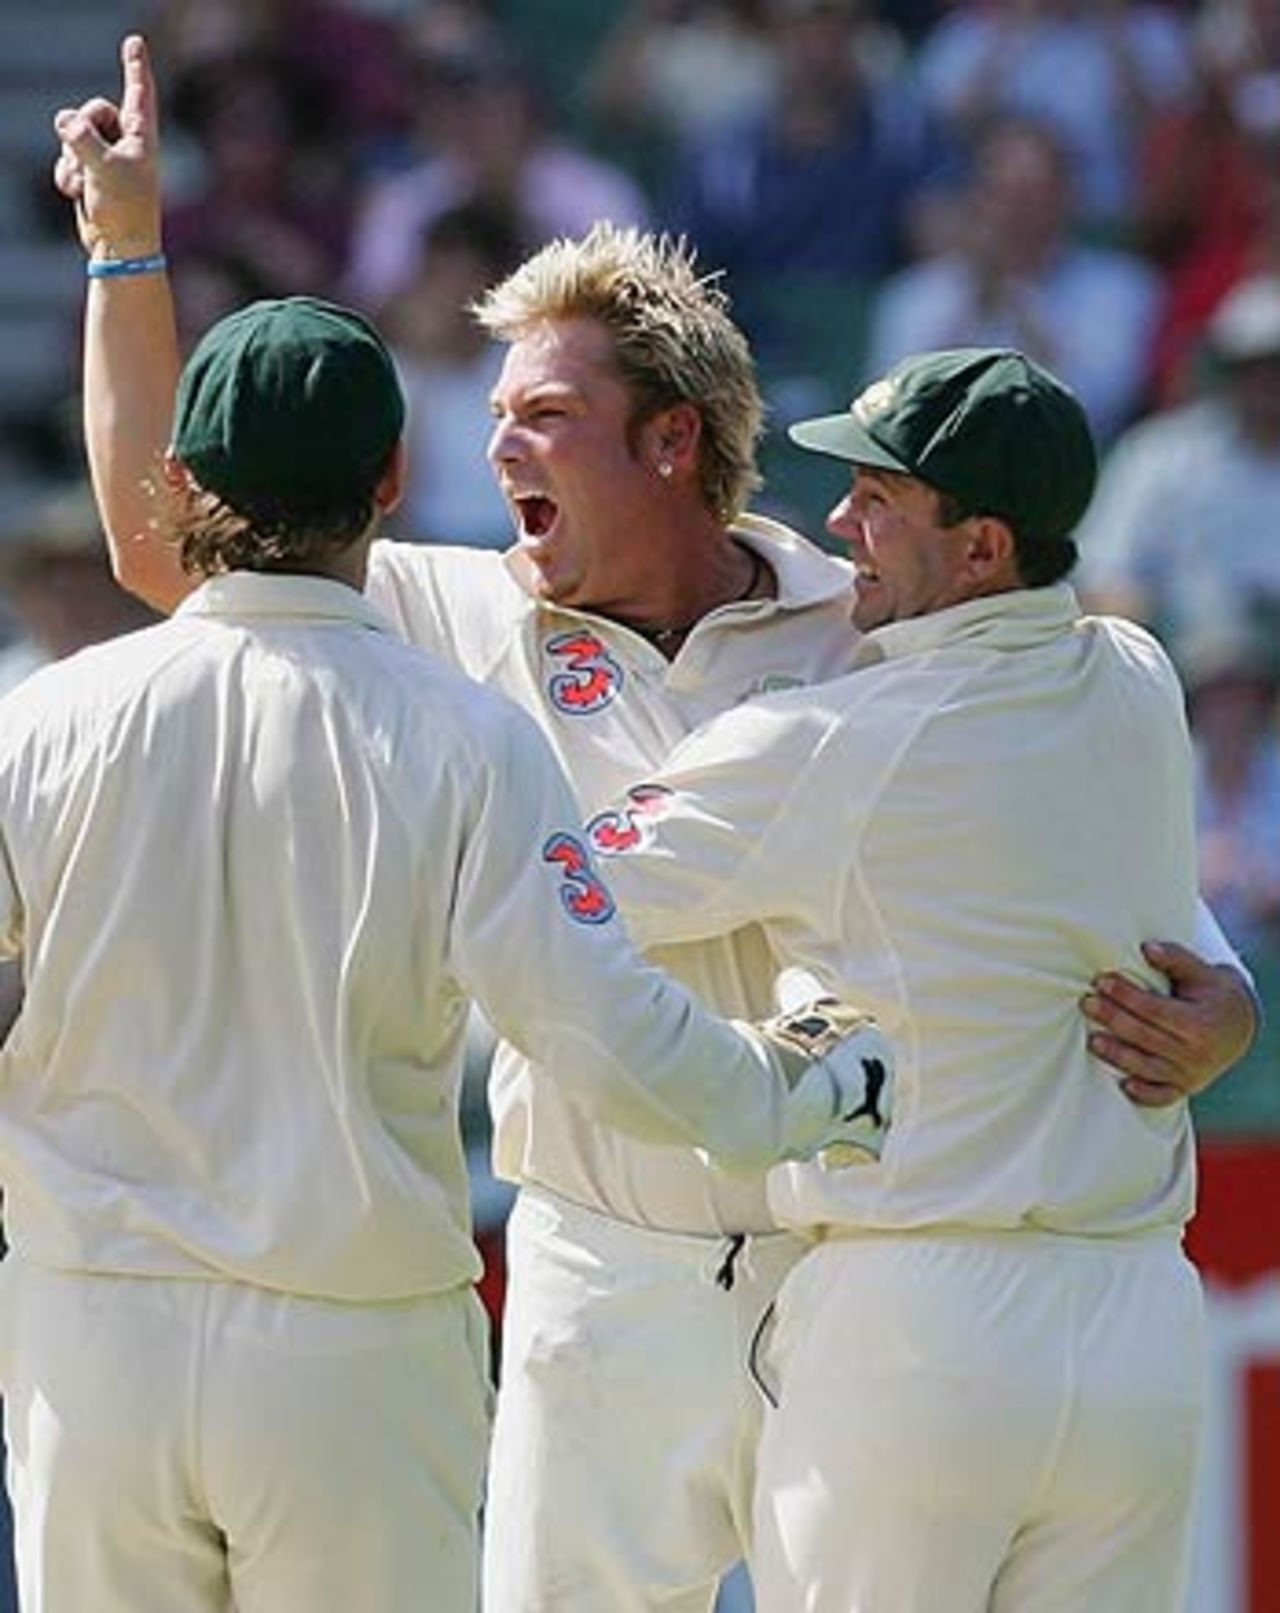 Shane Warne celebrates the wicket of AB de Villiers, Australia v South Africa, 2nd Test, Melbourne, 4th day, December 29, 2005